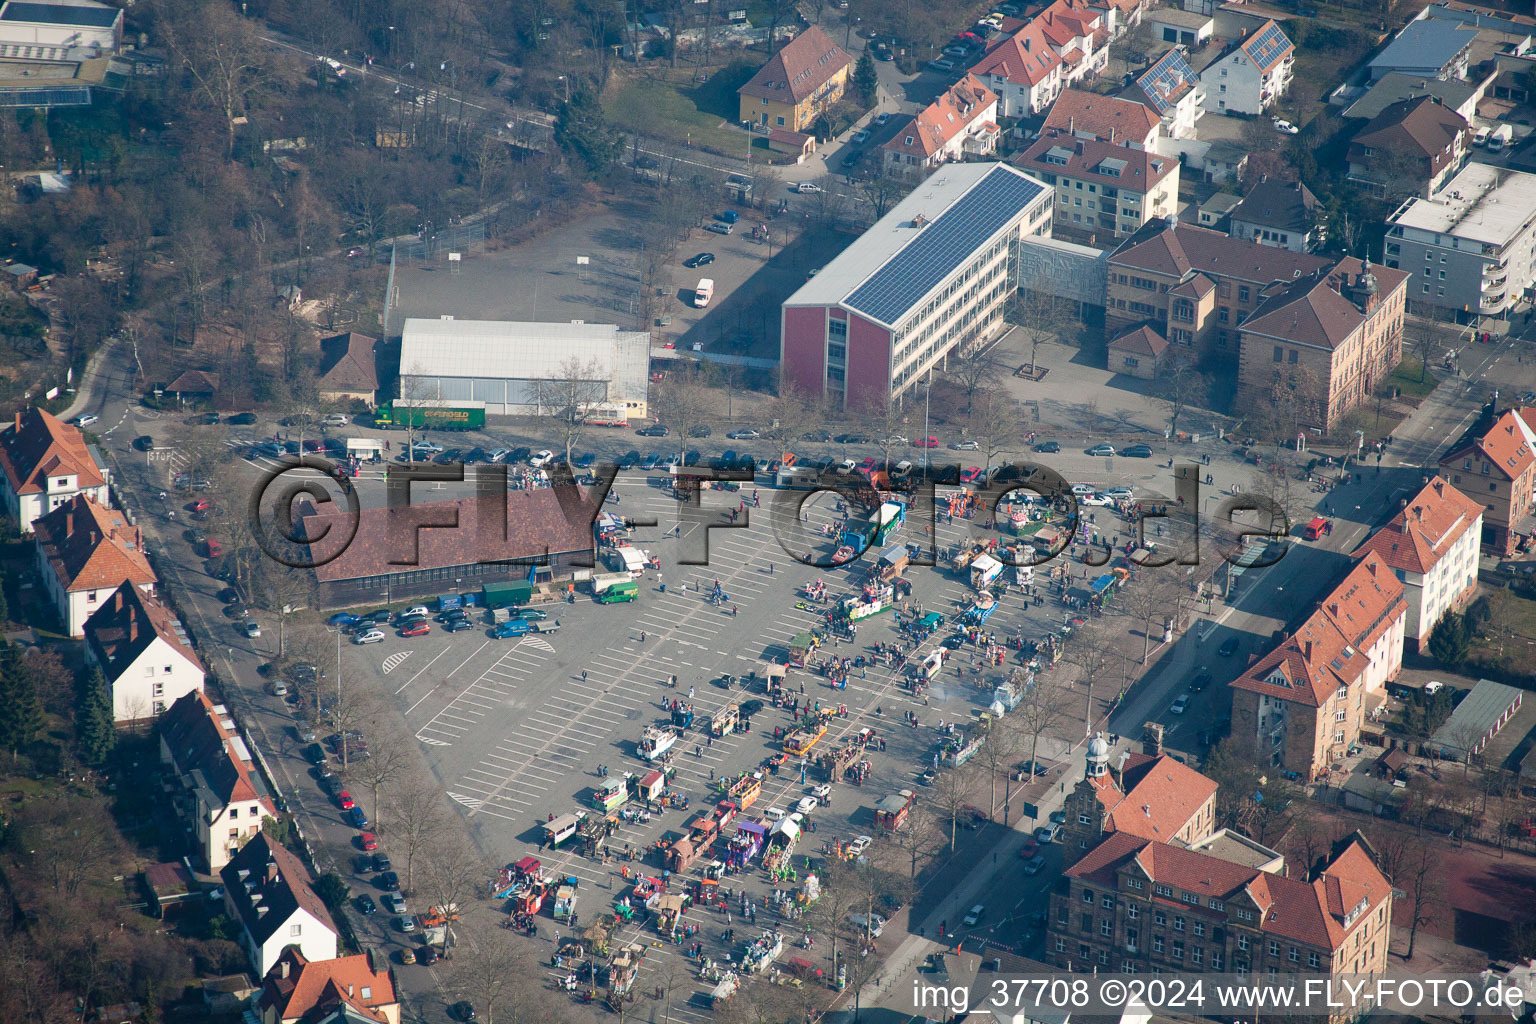 Aerial view of Market square, setting up the carnival parade in Landau in der Pfalz in the state Rhineland-Palatinate, Germany